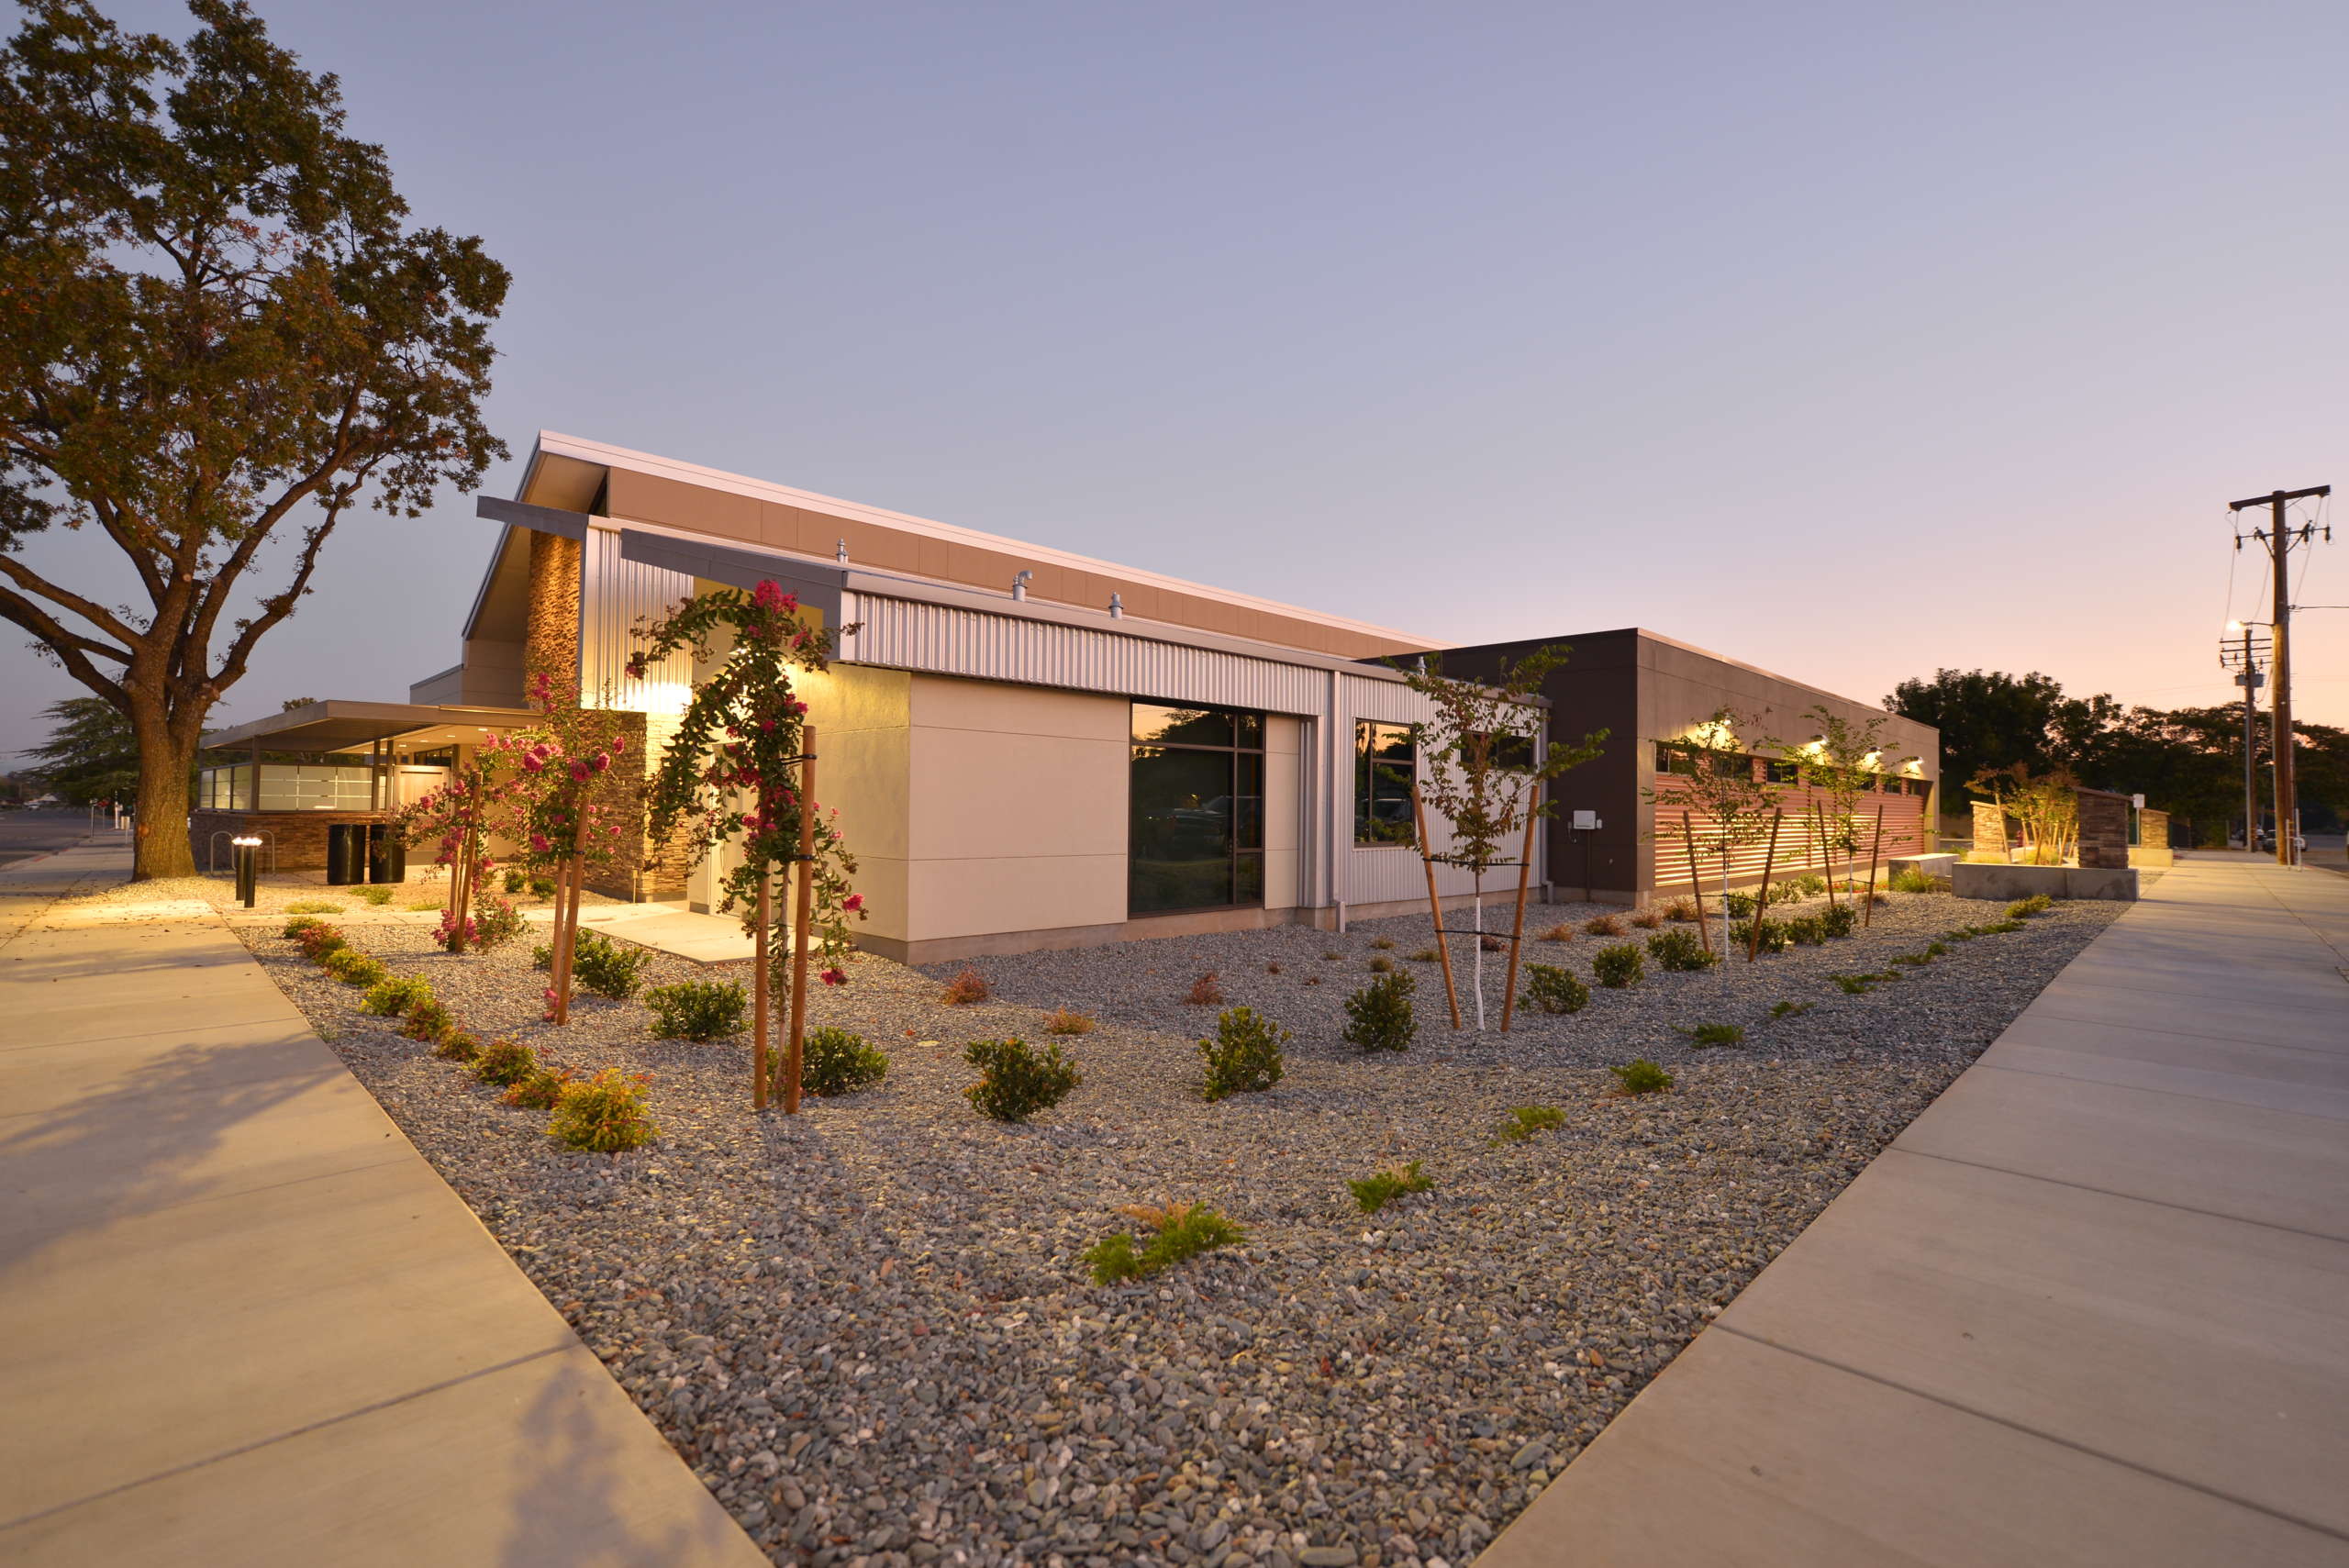 Side view of the Anderson Family Health & Dental Center at the Shasta Community Health Center at sunset